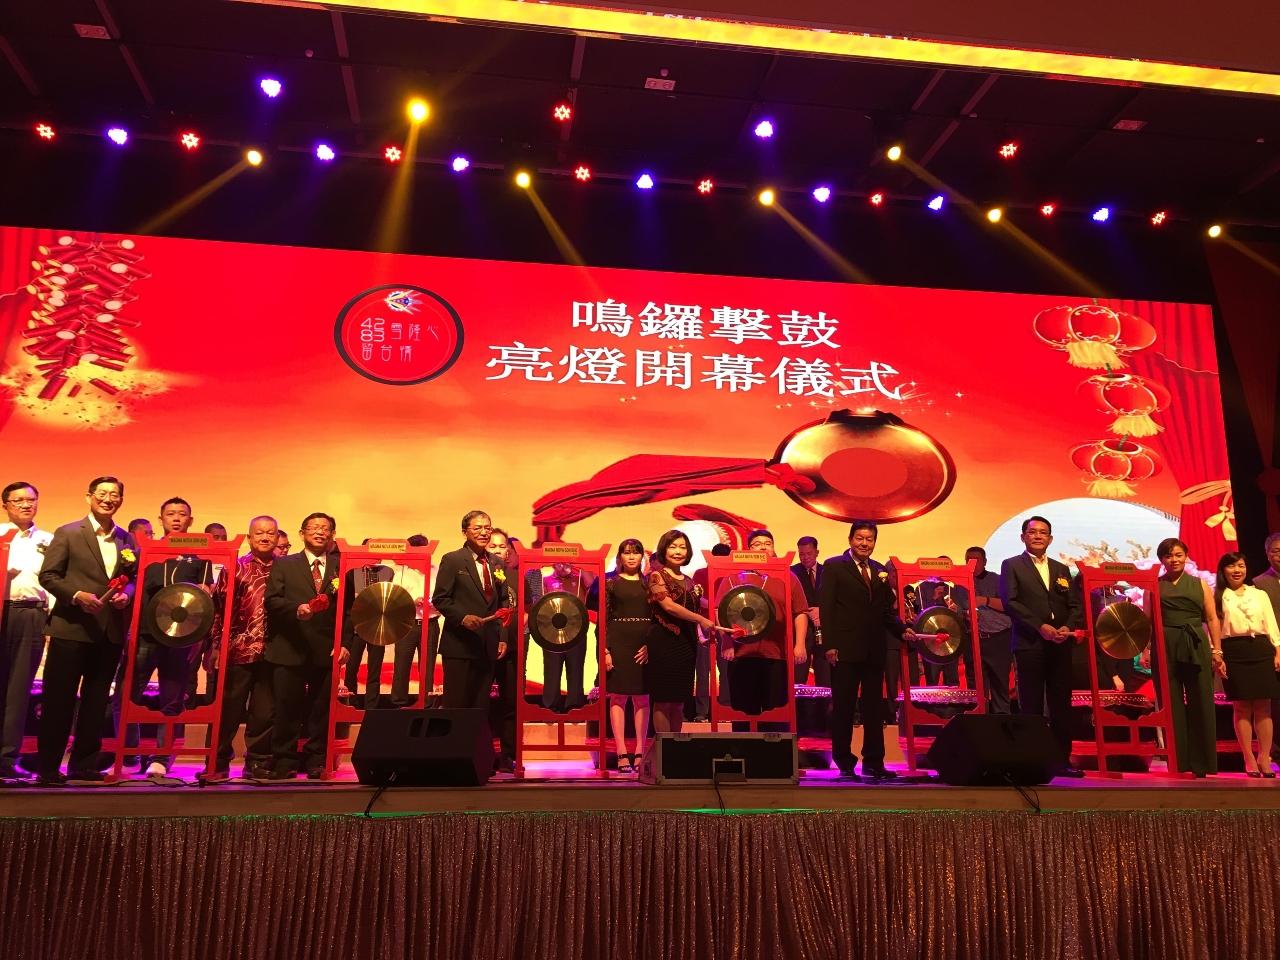 Representative Anne Hung (first row, third from right) attends the opening ceremony of the 42th anniversary dinner hosted by The Alumni Association of Taiwan, Selangor &amp; W.P..
